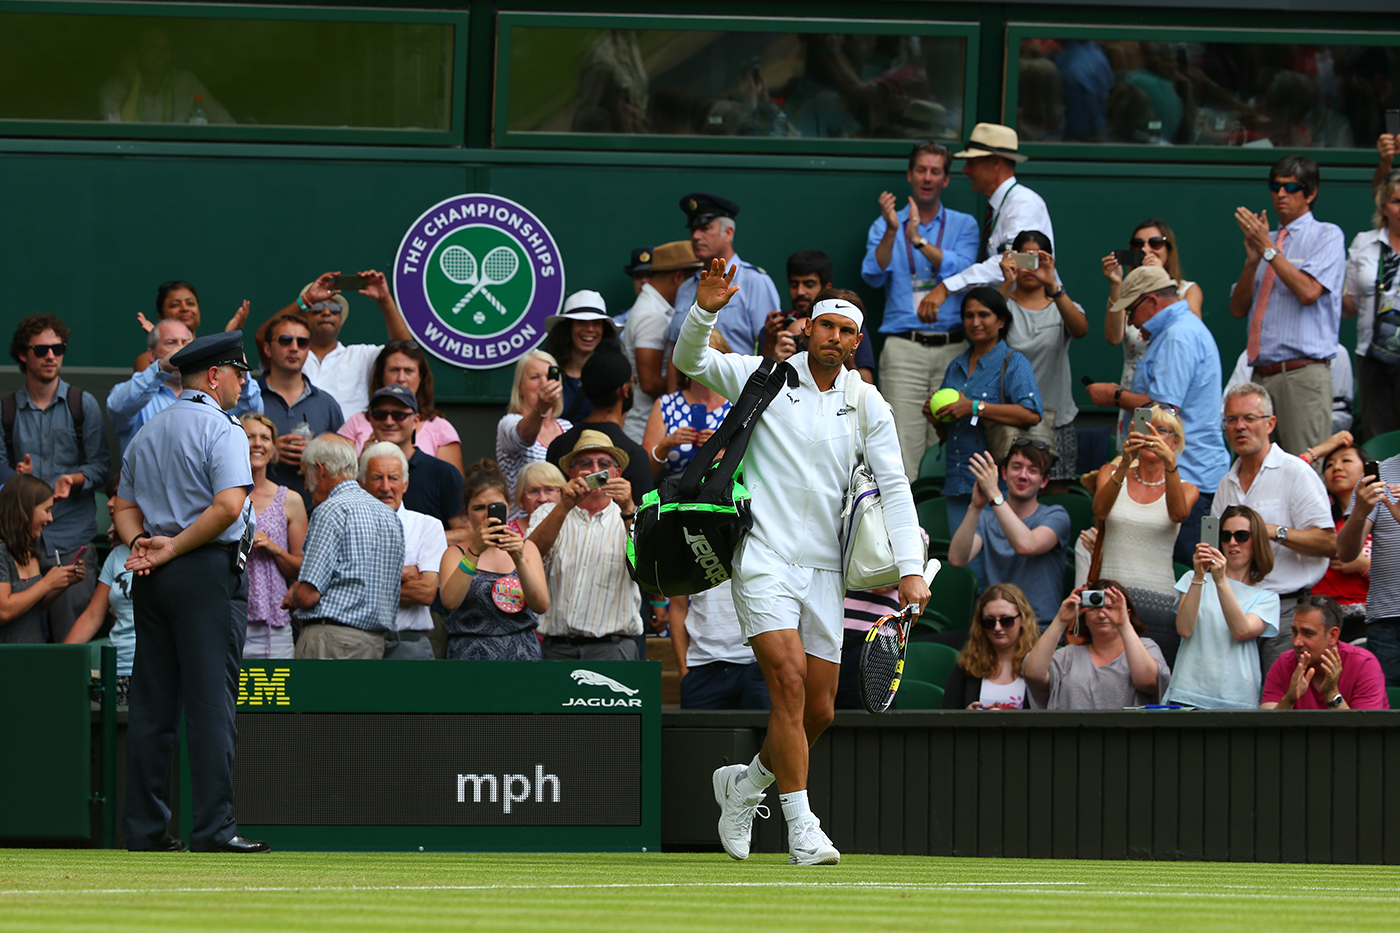 Upset On Centre Court Brown Defeats Nadal The Championships Wimbledon Official Site By Ibm 1293